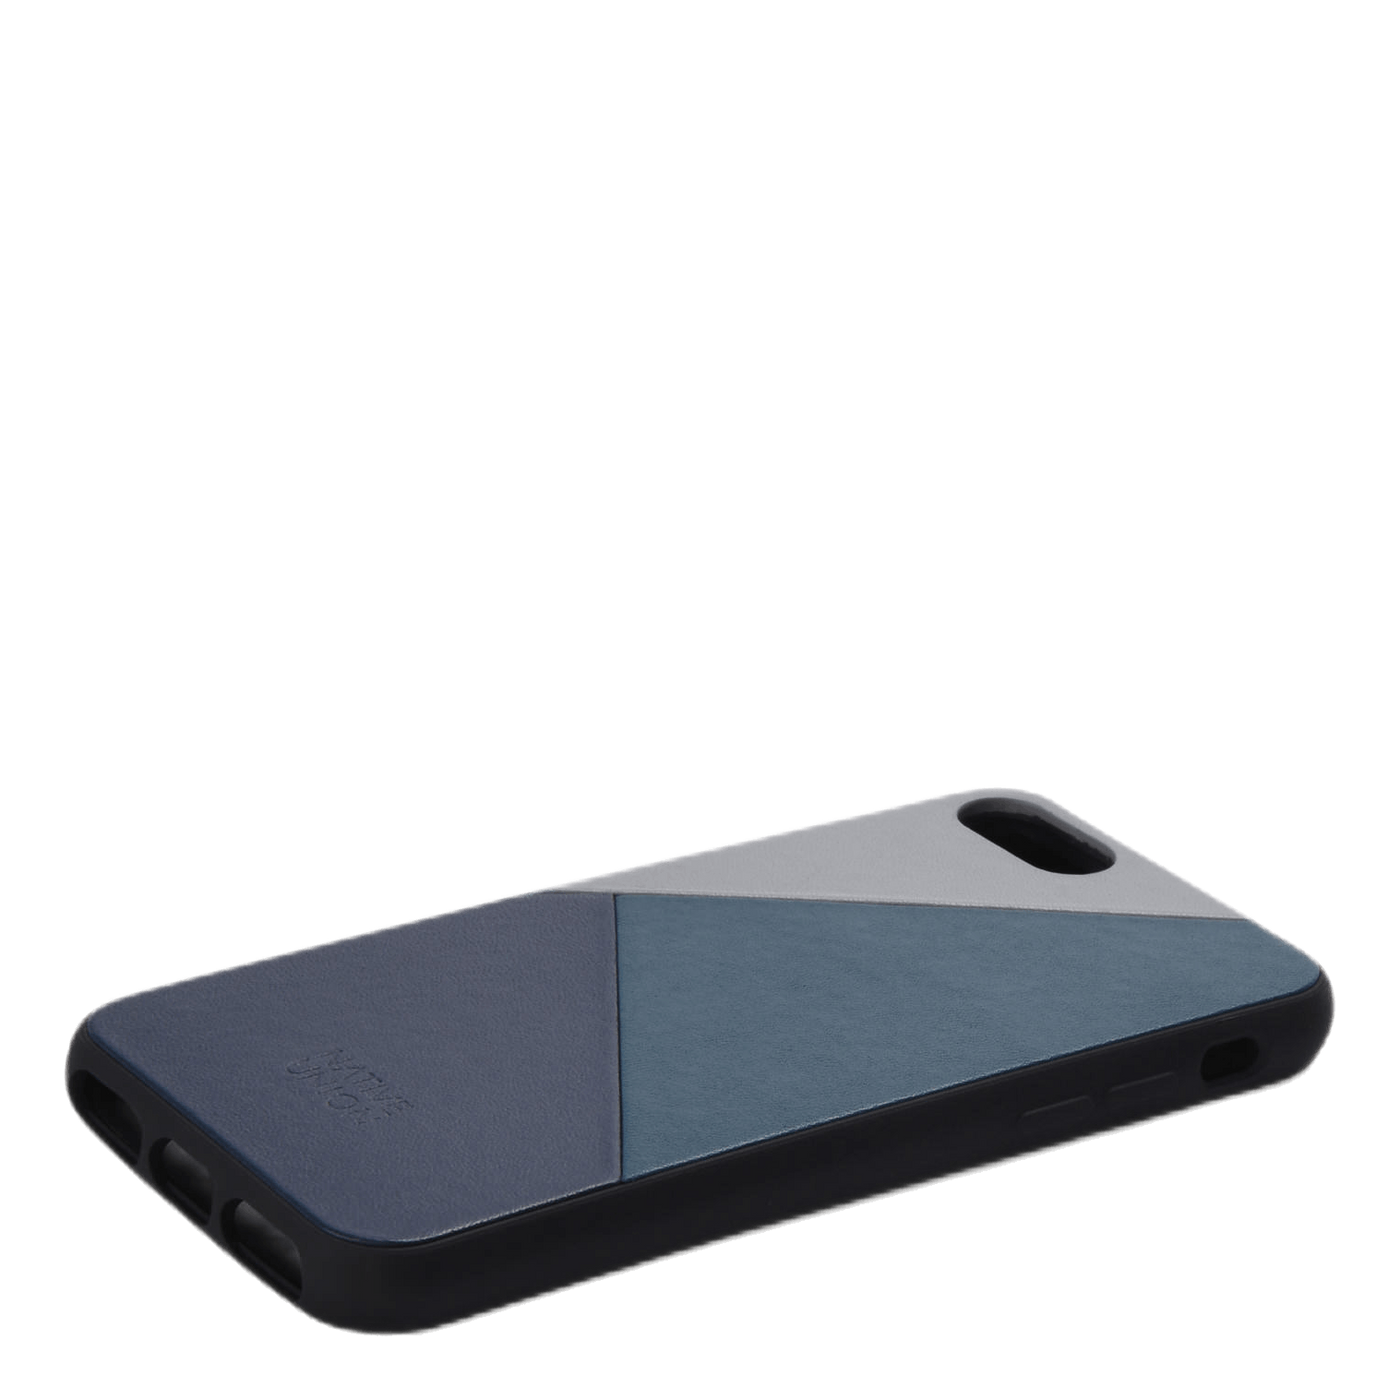 Clic Marquetry Iphone 7 Case Blue